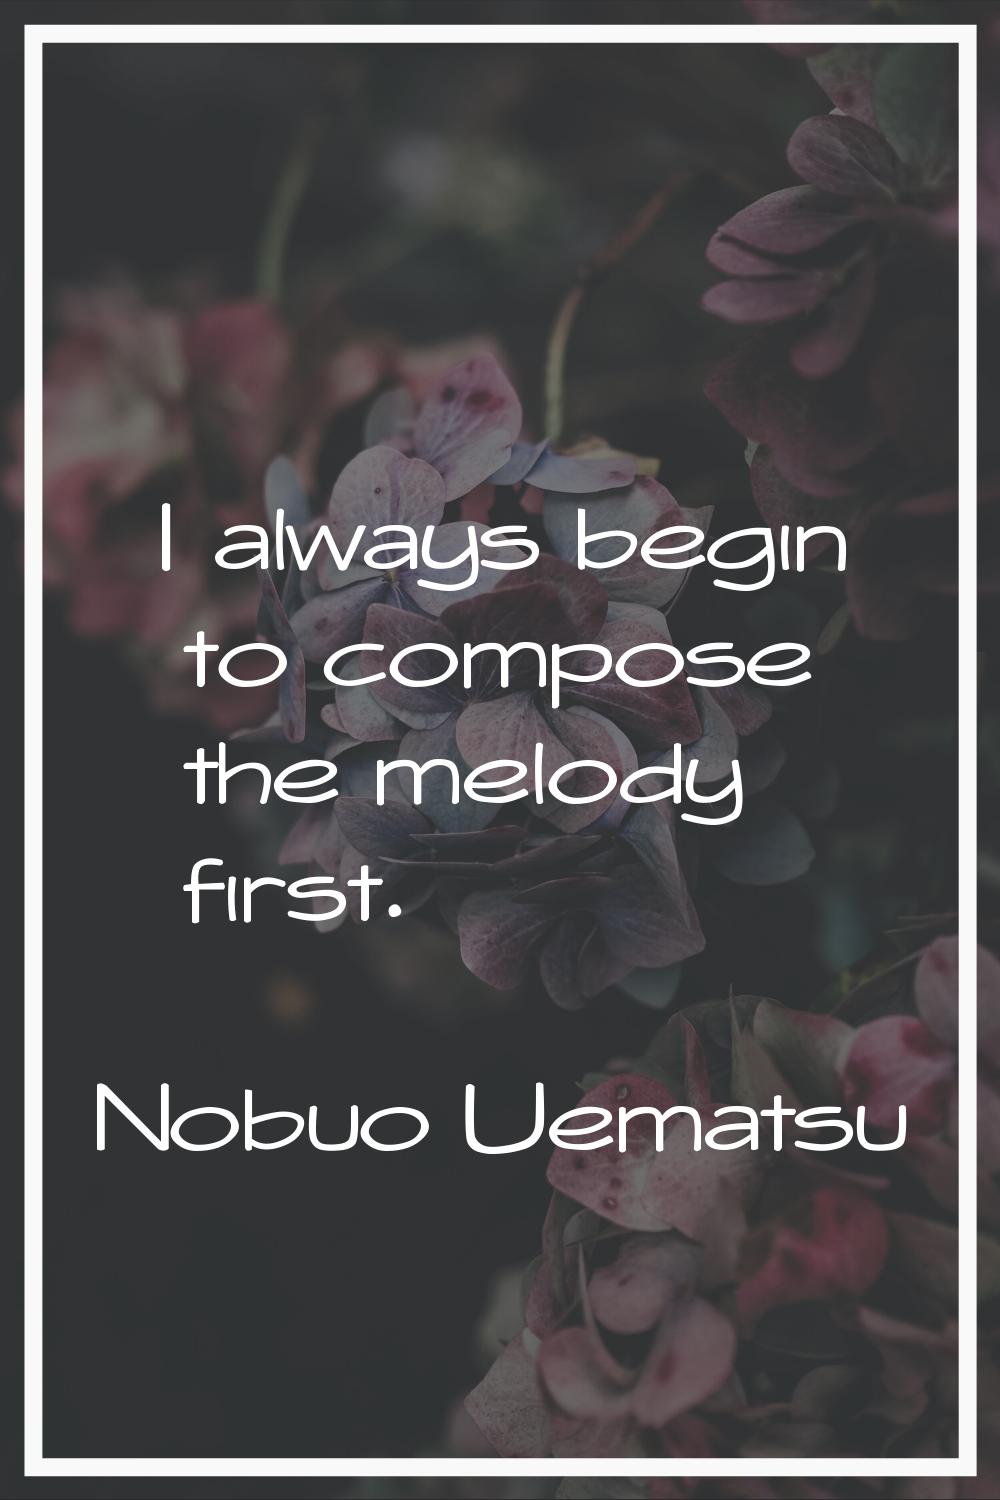 I always begin to compose the melody first.